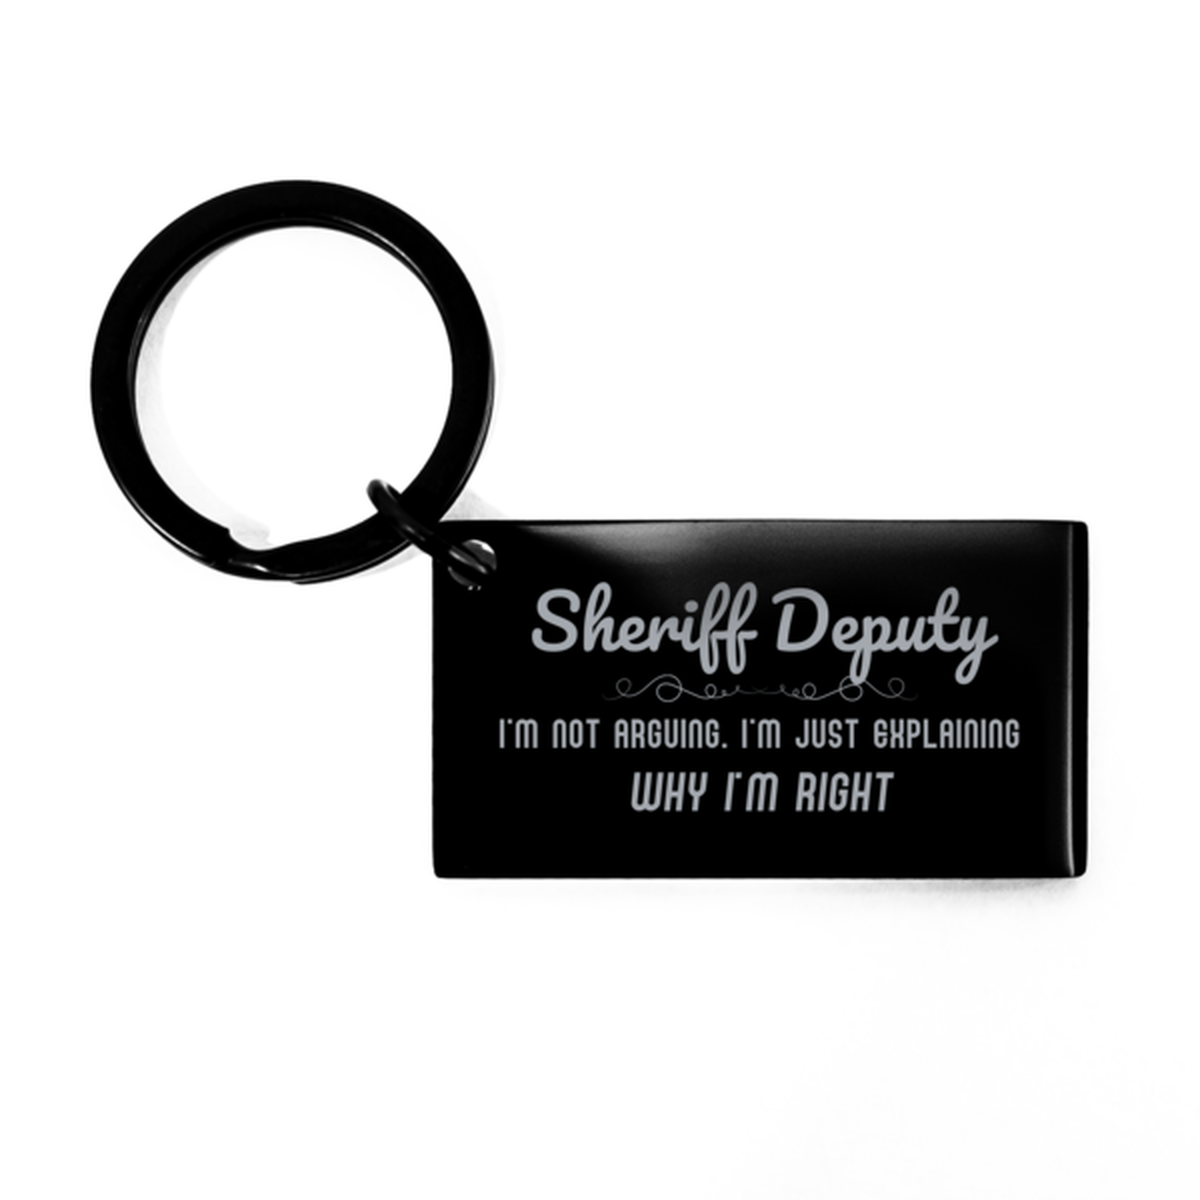 Sheriff Deputy I'm not Arguing. I'm Just Explaining Why I'm RIGHT Keychain, Funny Saying Quote Sheriff Deputy Gifts For Sheriff Deputy Graduation Birthday Christmas Gifts for Men Women Coworker